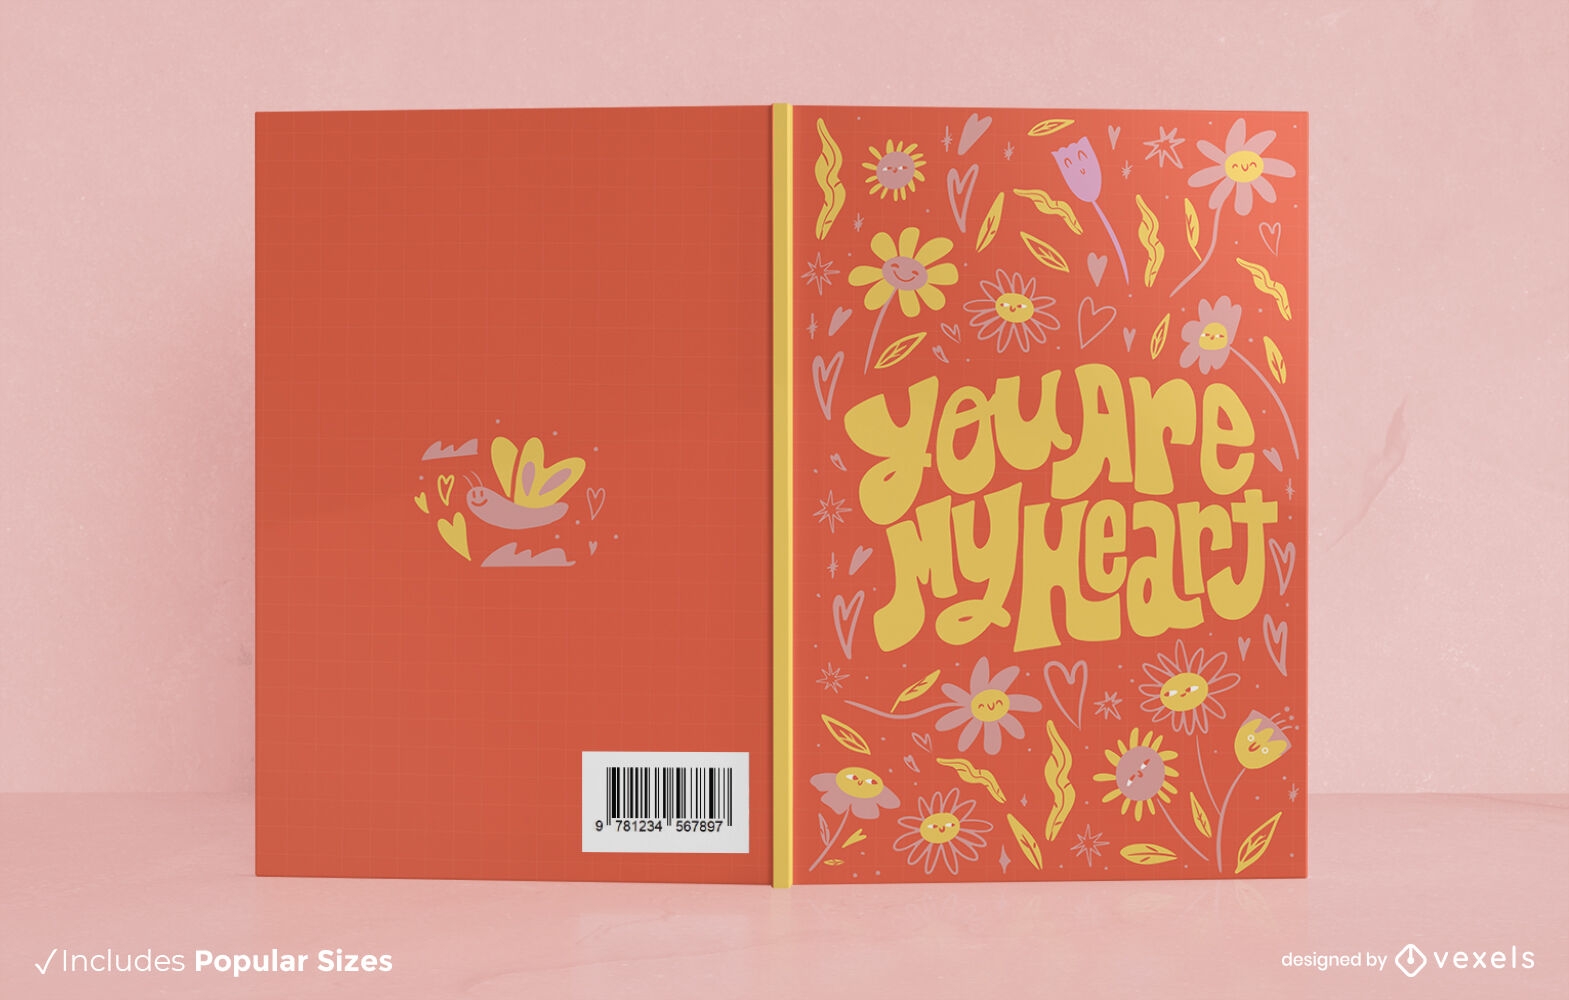 Floral love quote lettering book cover design